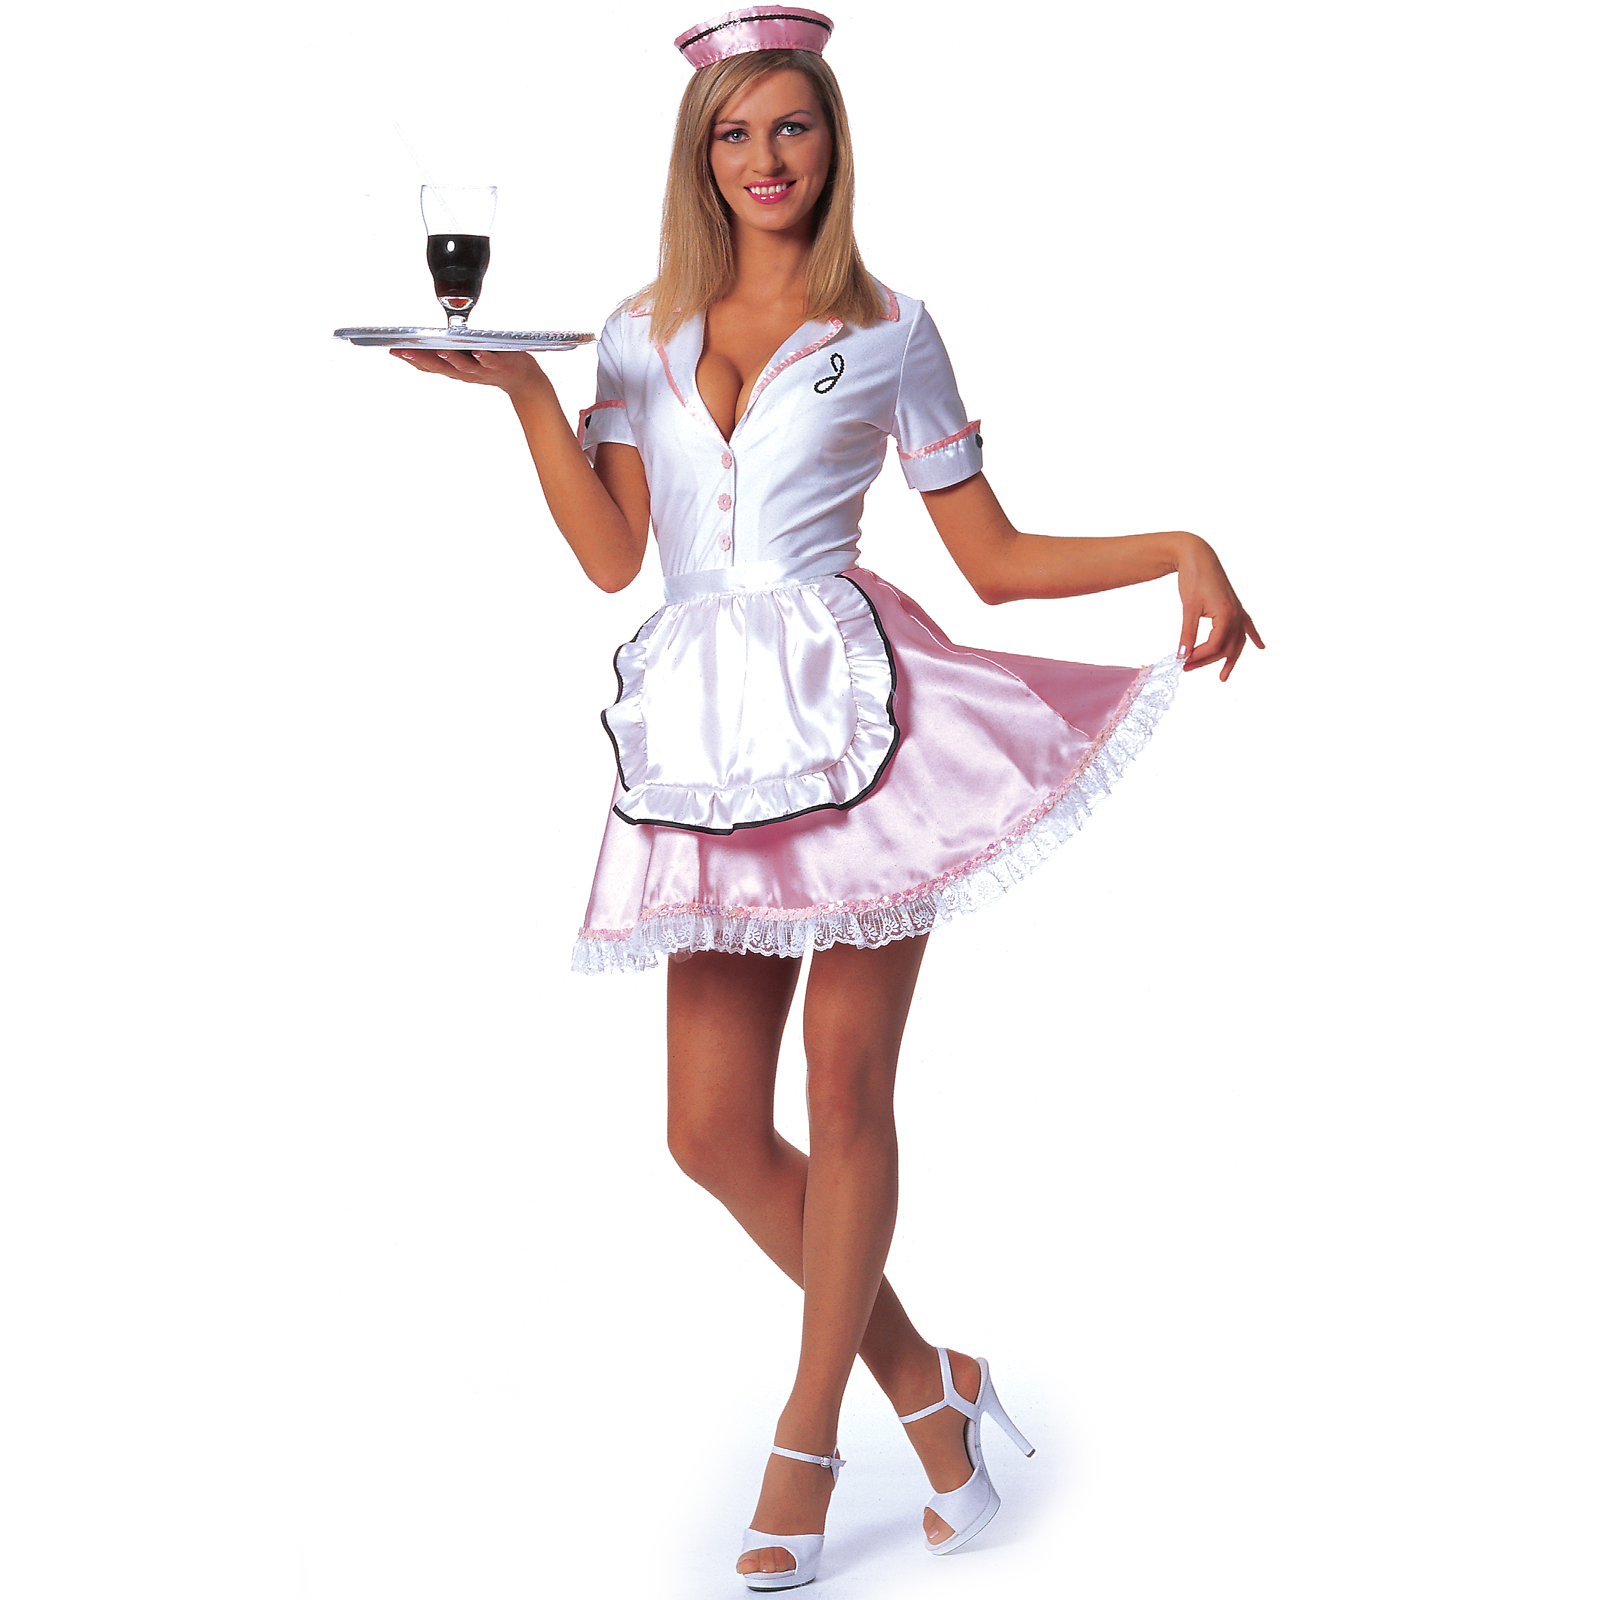 Re: Costume suggestion needed for waitress during Gencon.